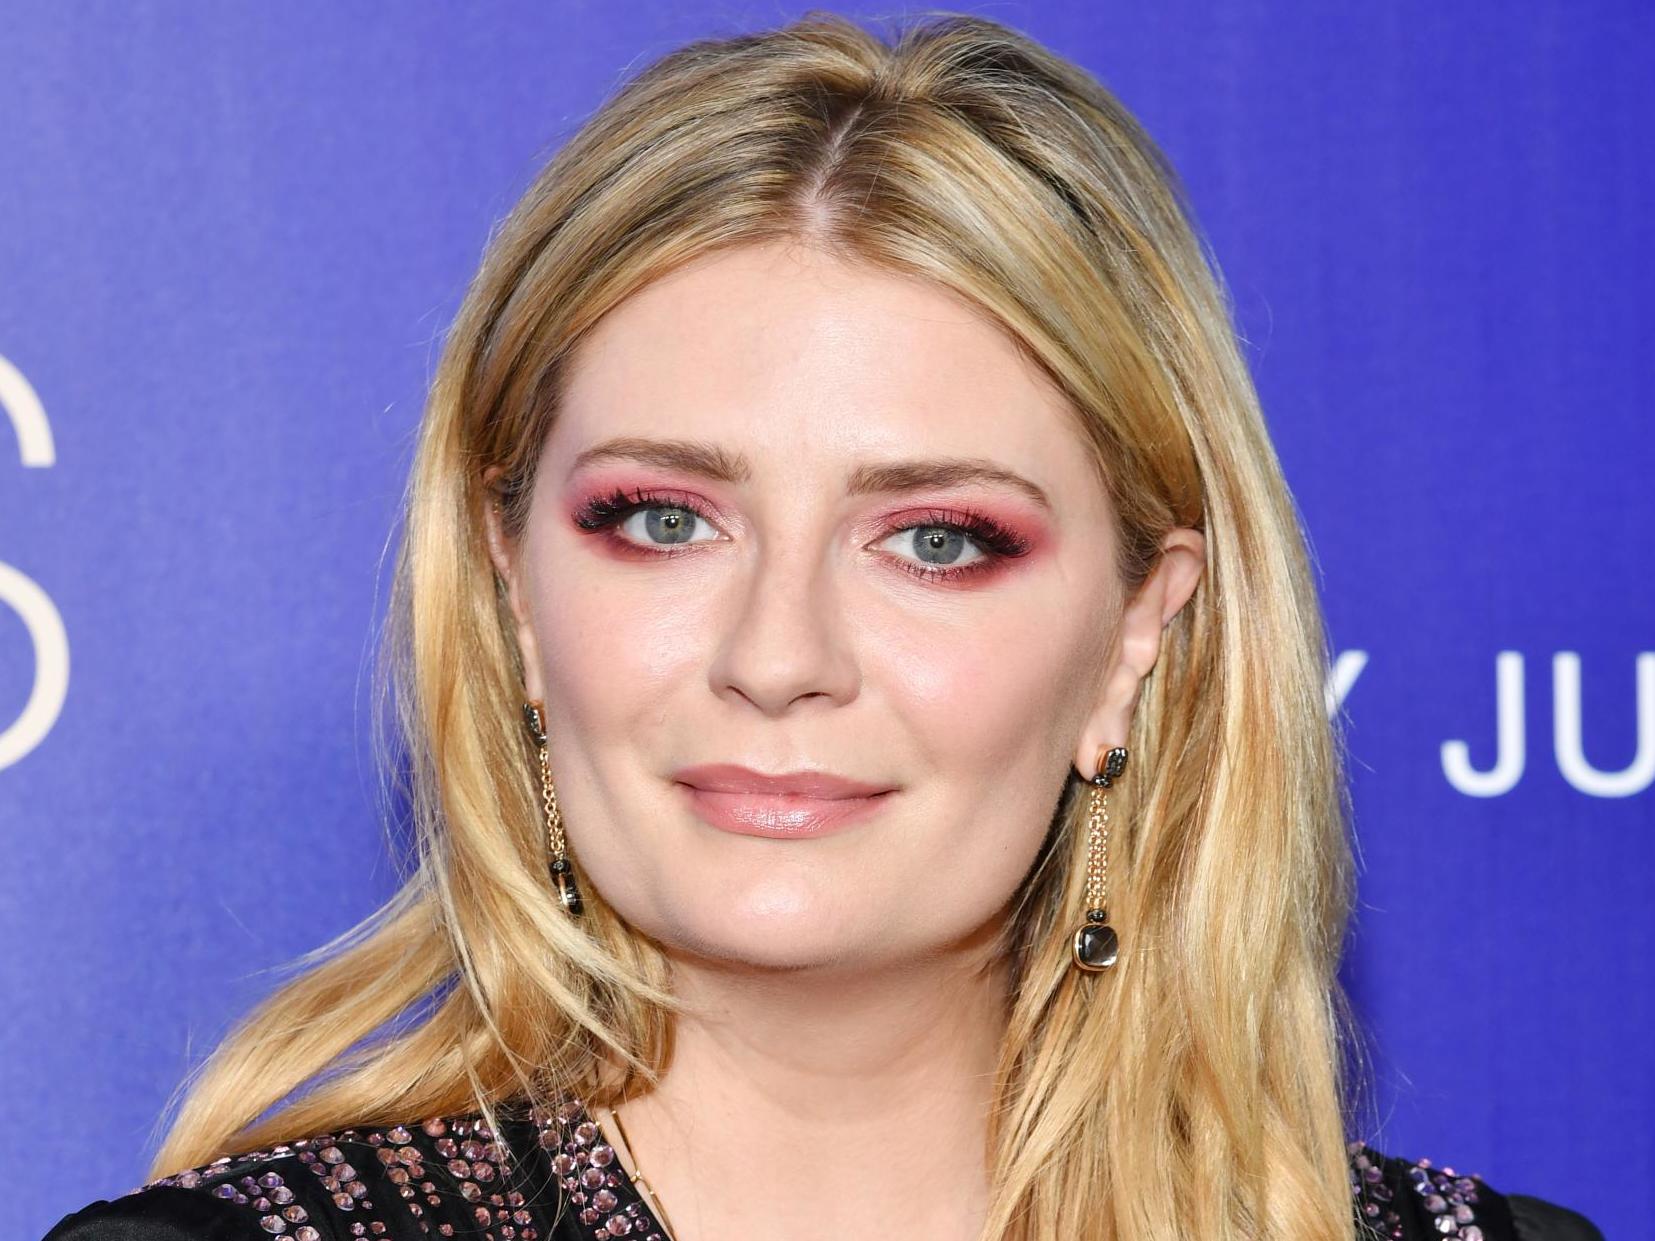 Mischa Barton Hits Back At Reports She Has Been Fired From The Hills